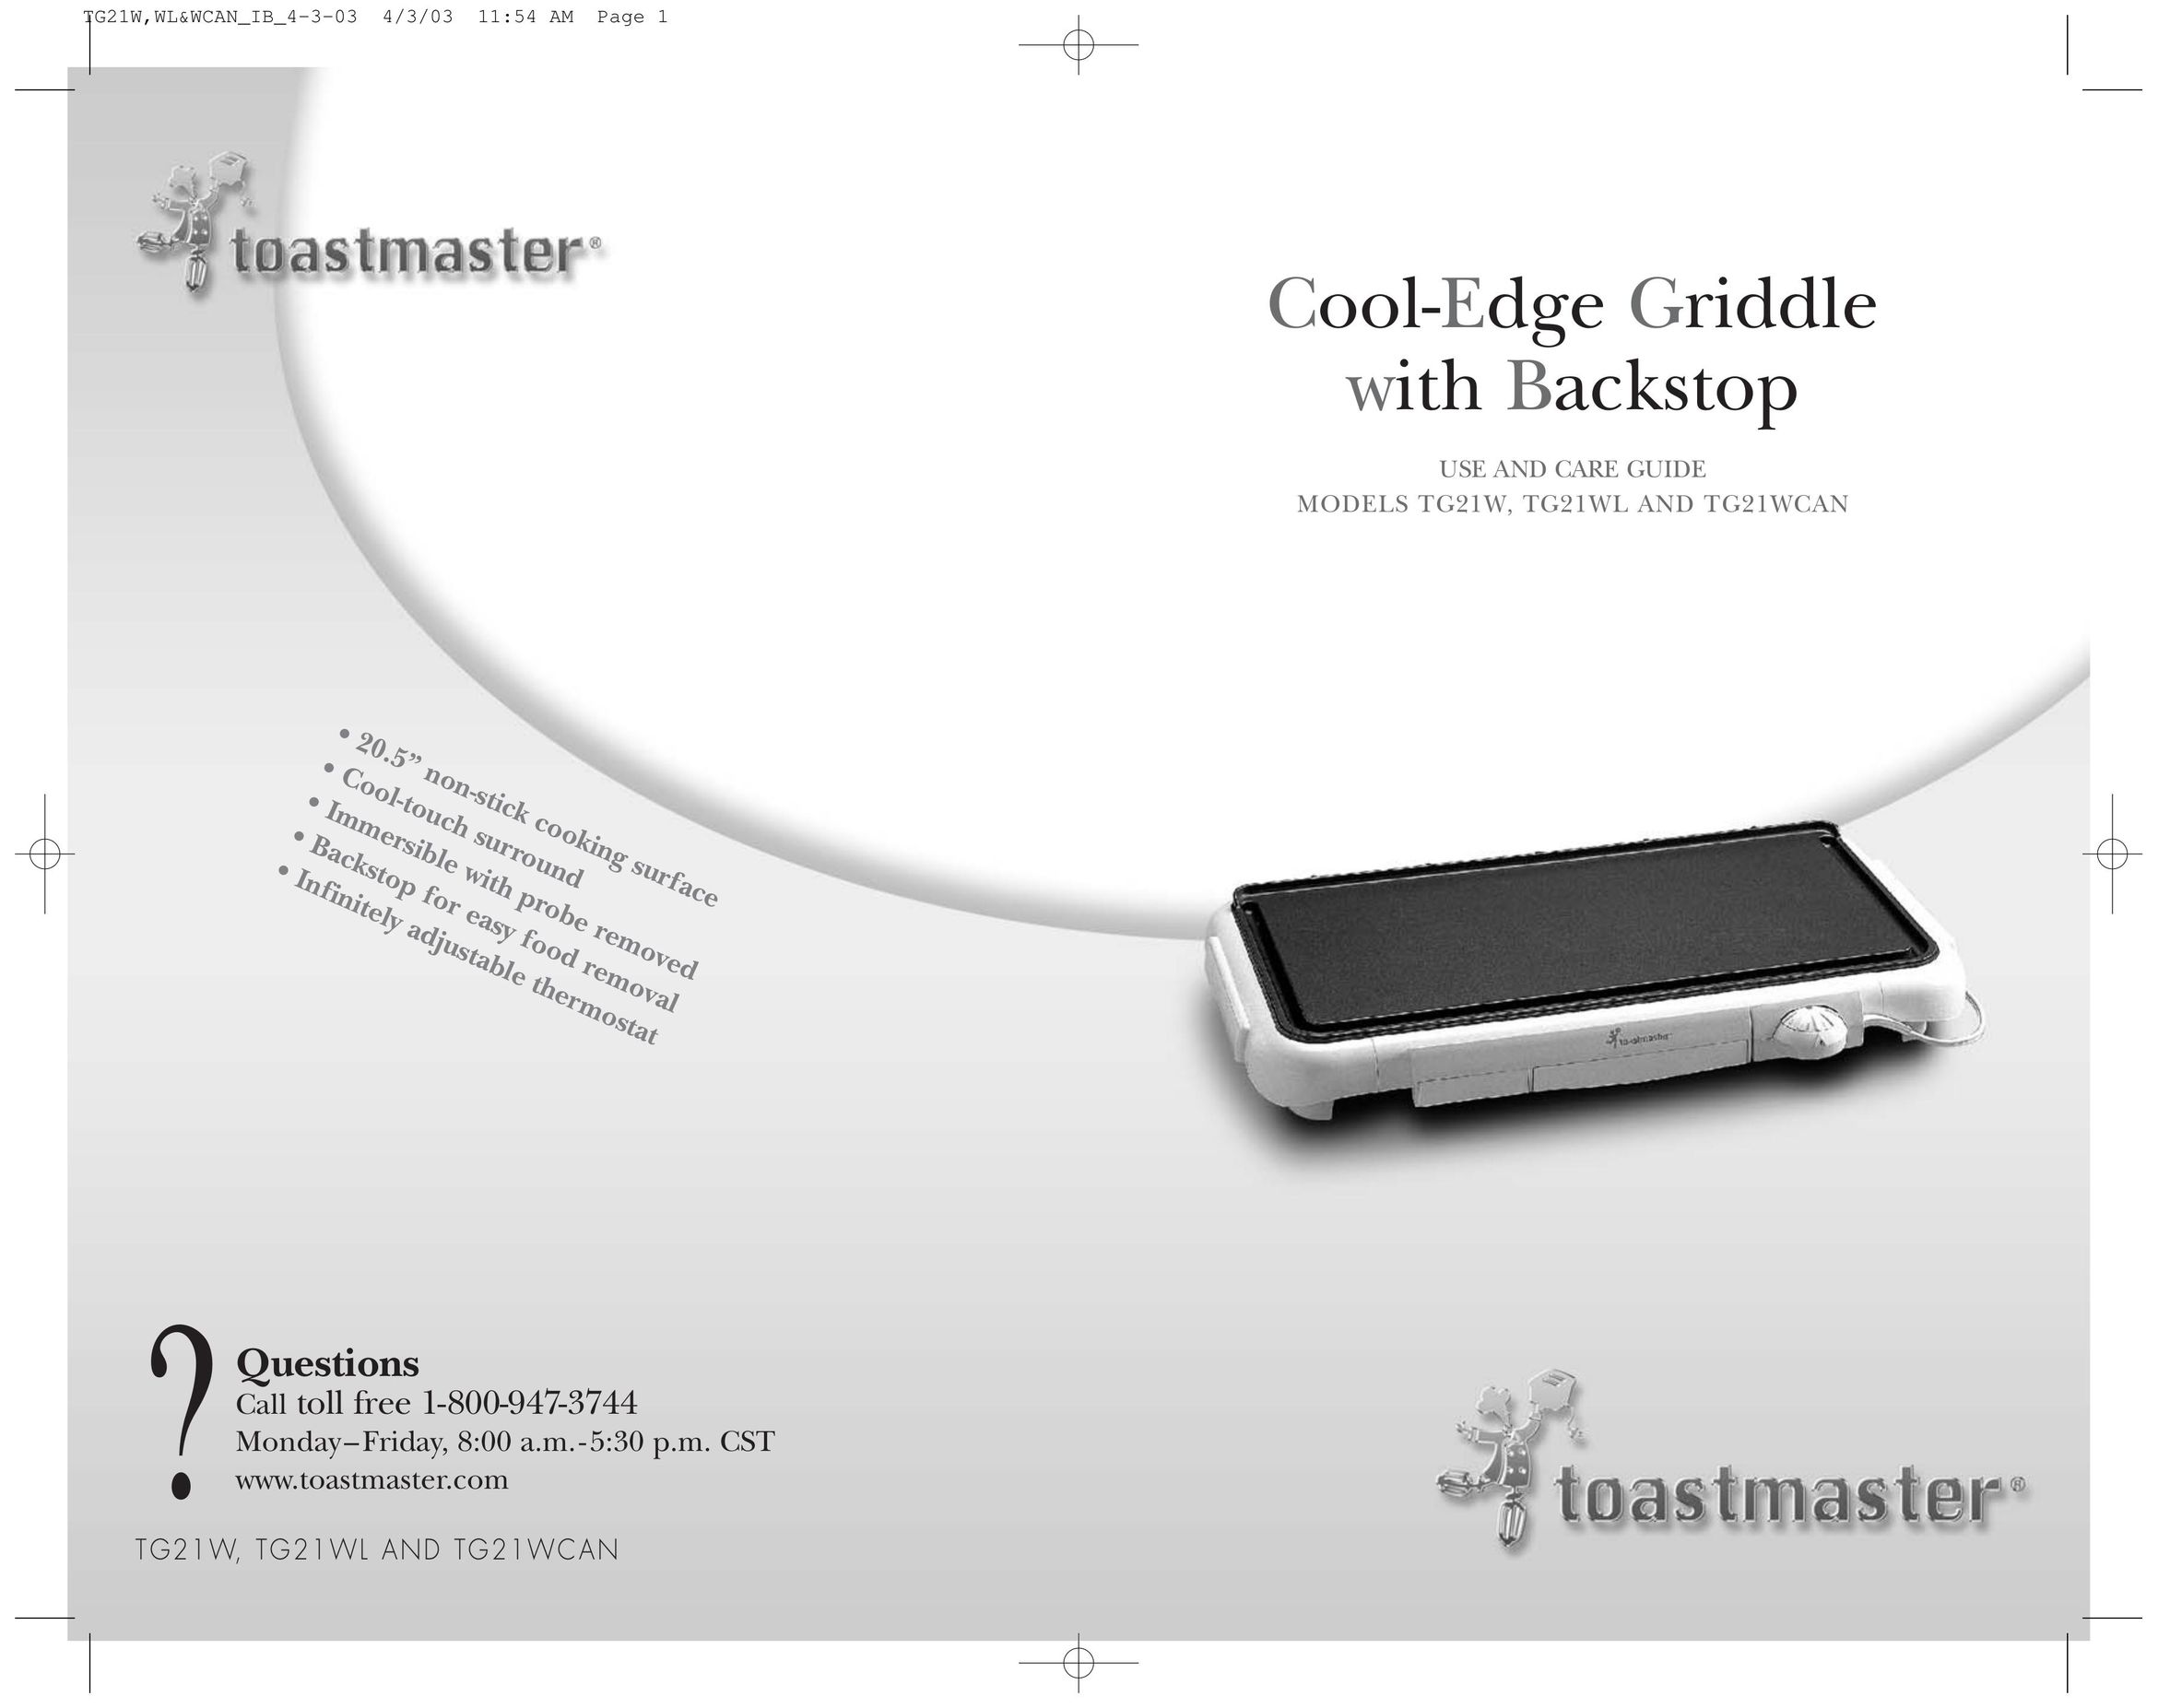 Toastmaster TG21WCAN Griddle User Manual